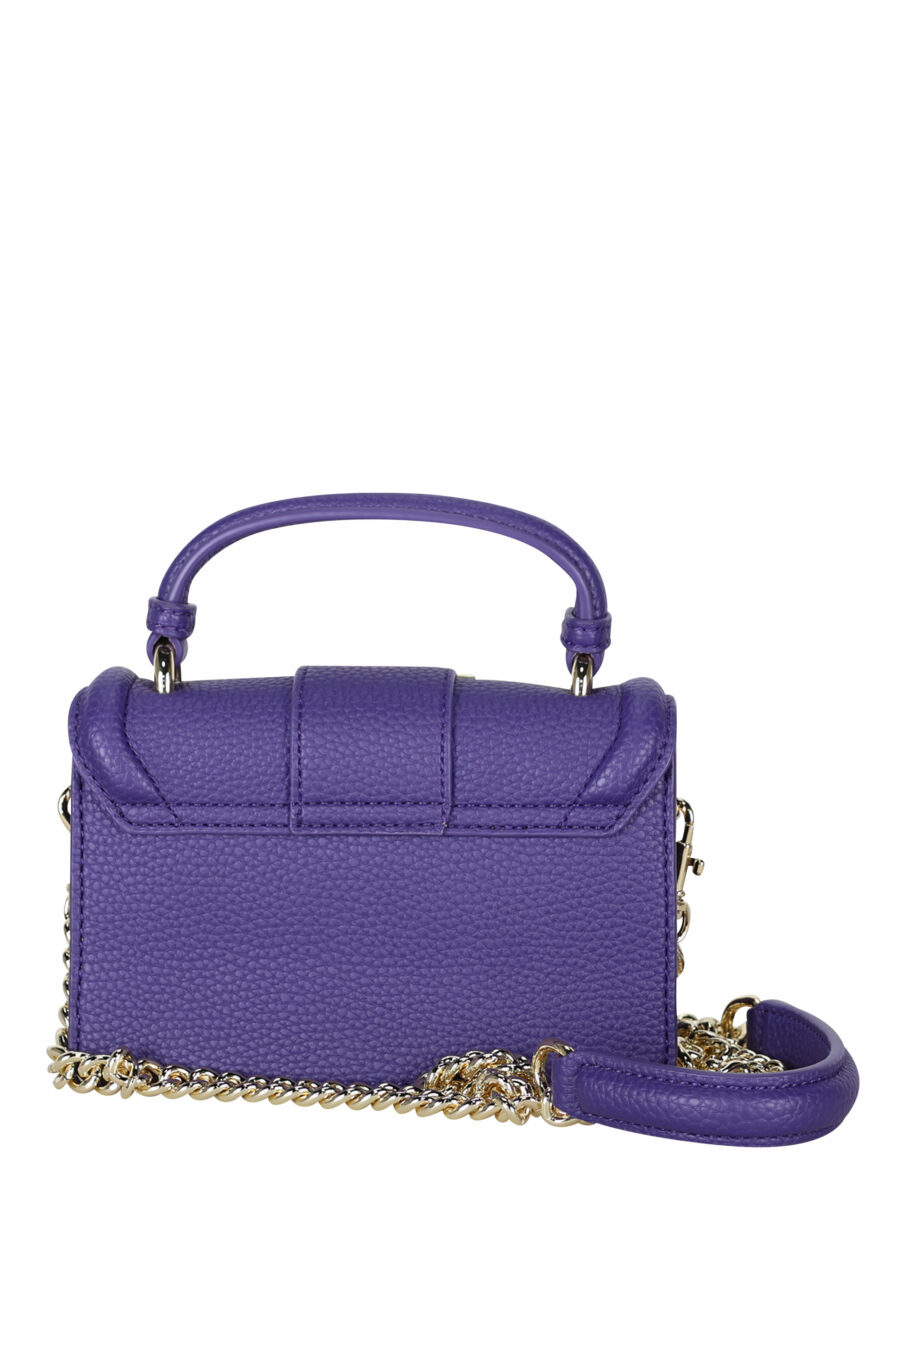 Purple shoulder bag with chain and baroque buckle - 8052019407600 2